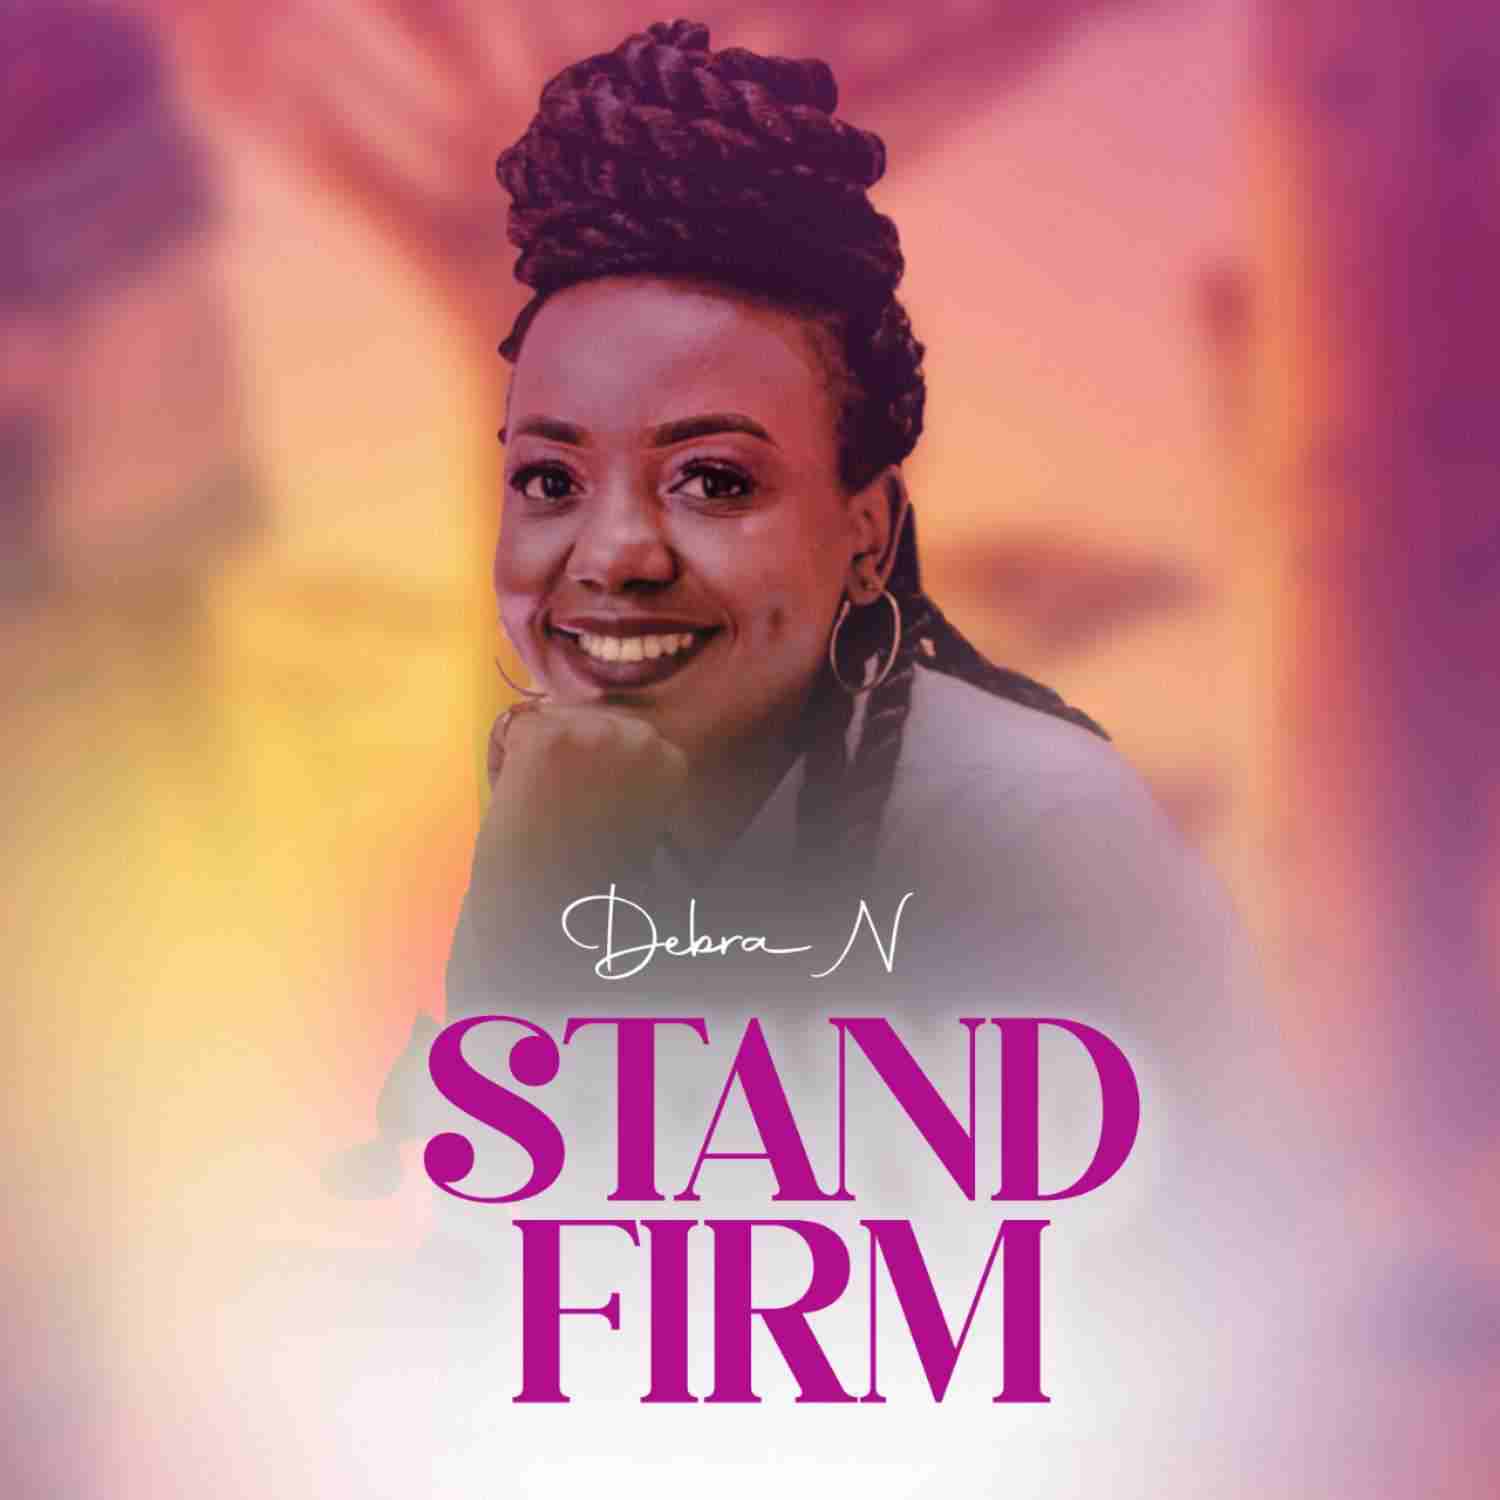 Stand firm 